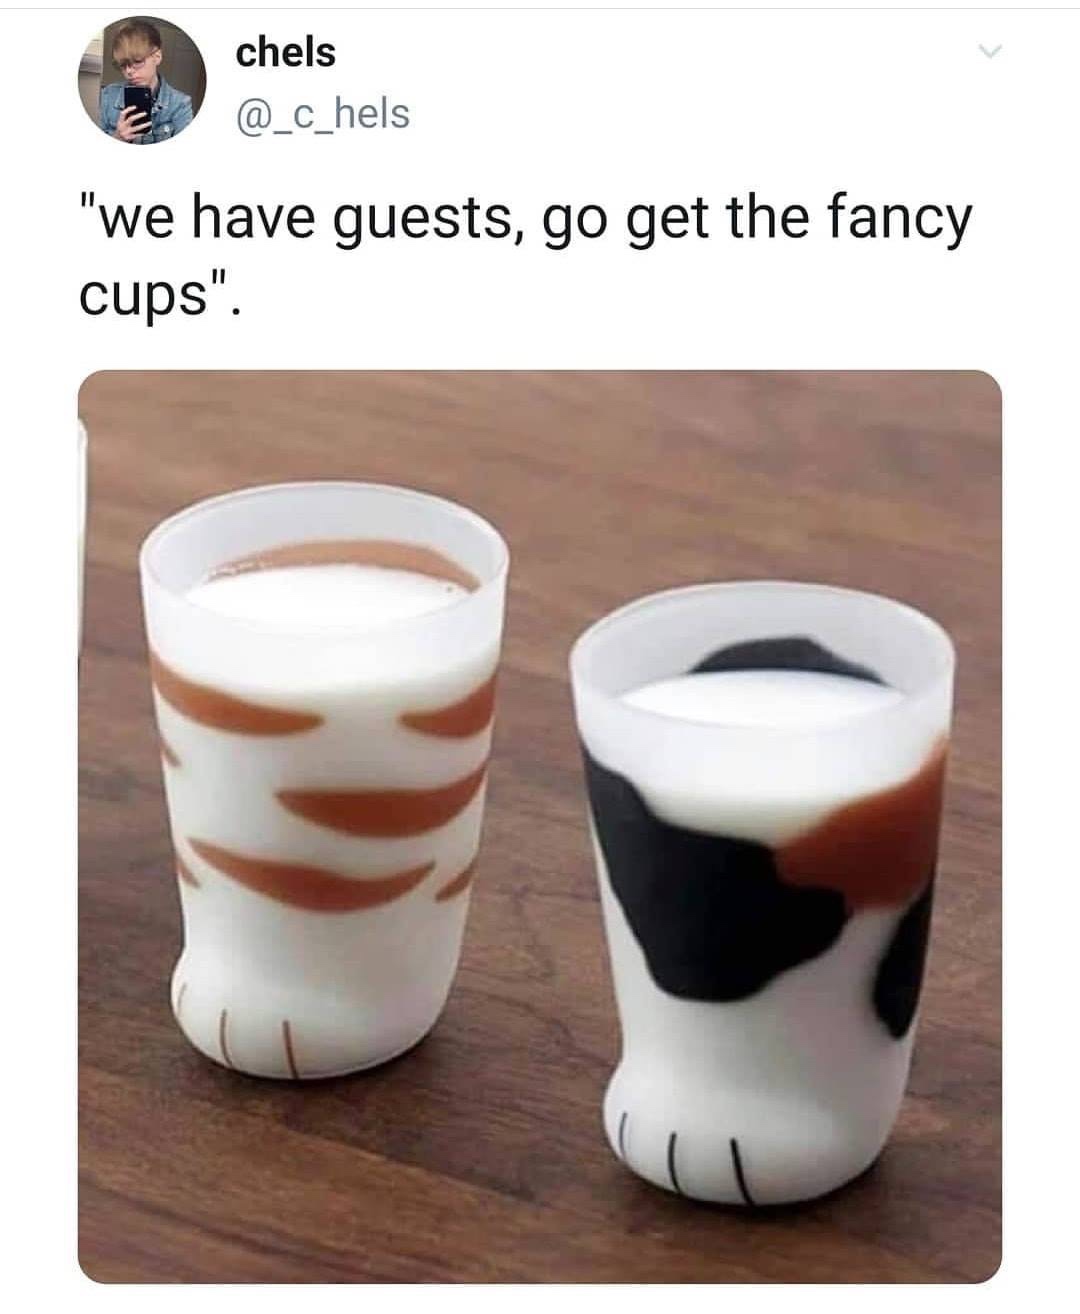 cat paw cup - chels "we have guests, go get the fancy cups".